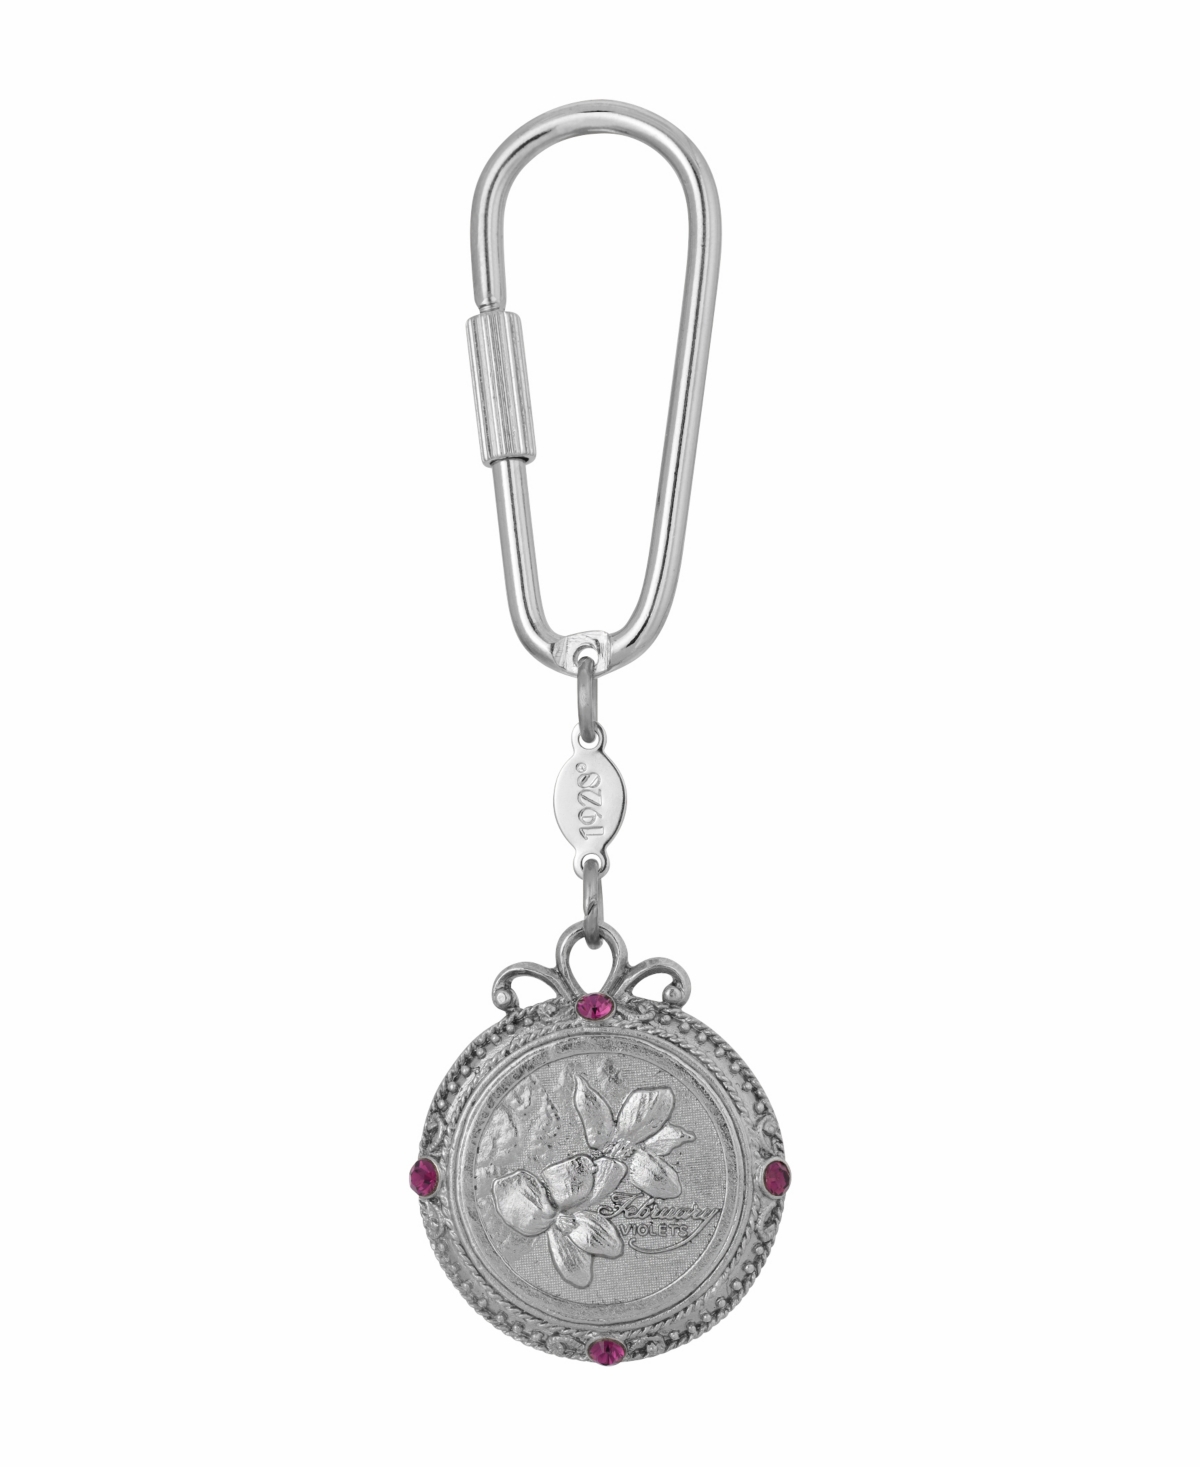 2028 Women's February Flower Of The Month Violets Key Fob In Purple